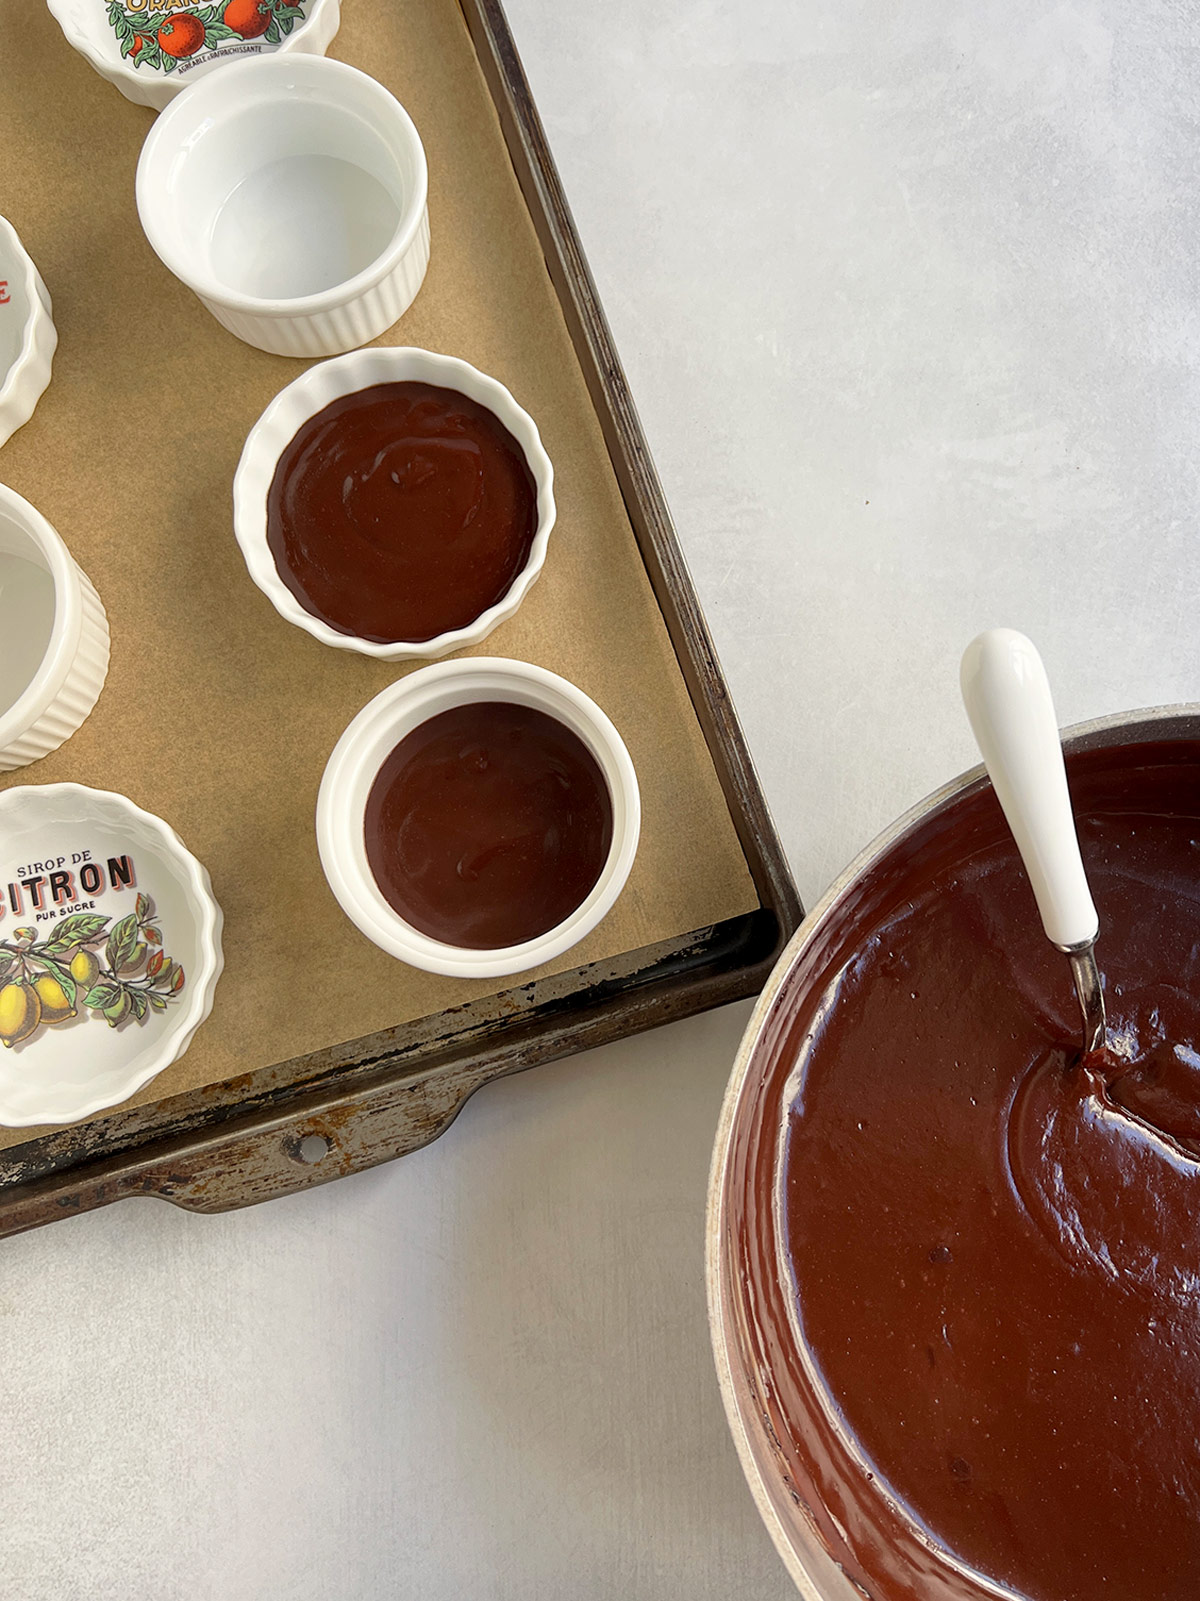 Filling bowls with dairy free chocolate pudding. Bowls are on a parchment lined sheet tray and pudding is still in the pot with a ladle.